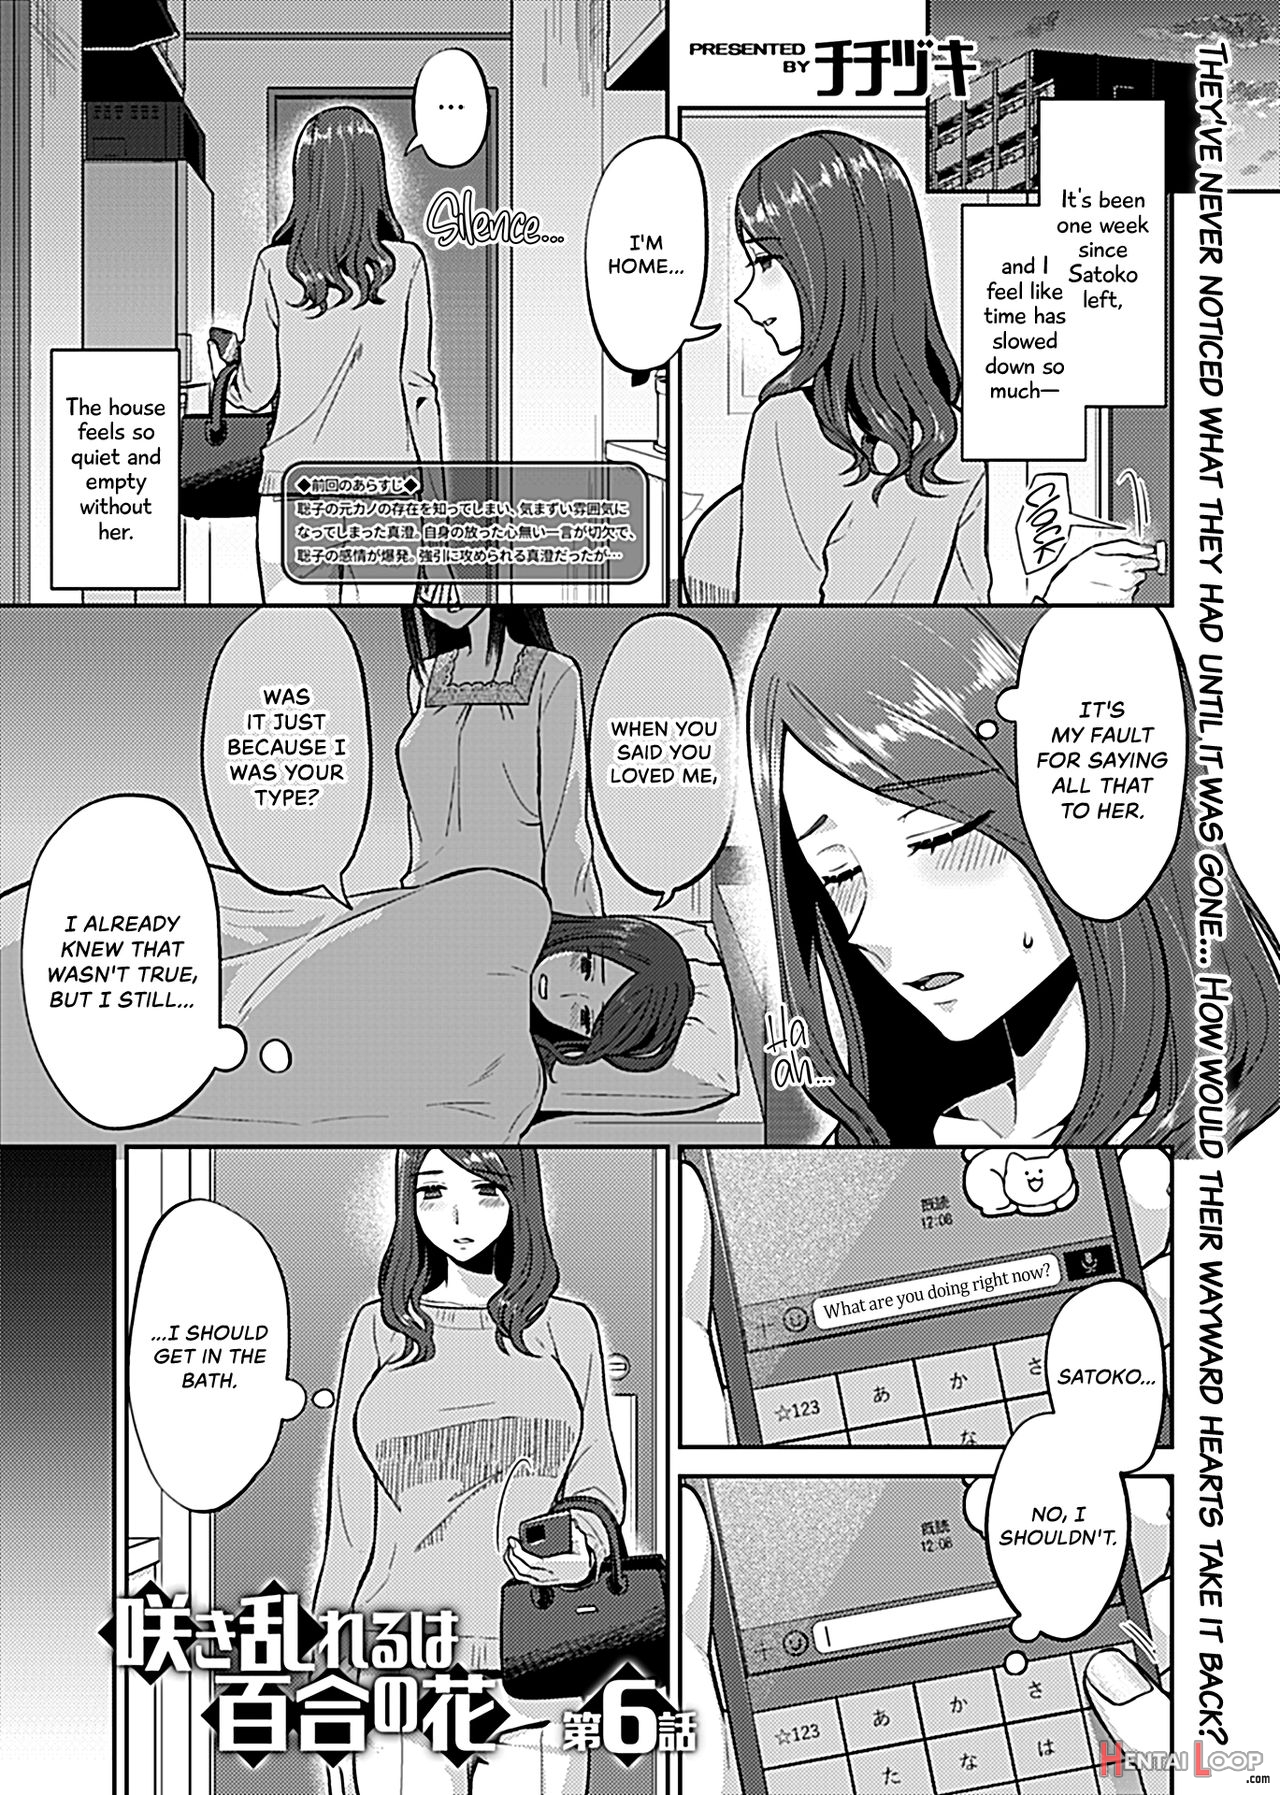 Lilies Are In Full Bloom - Volume 1 page 91